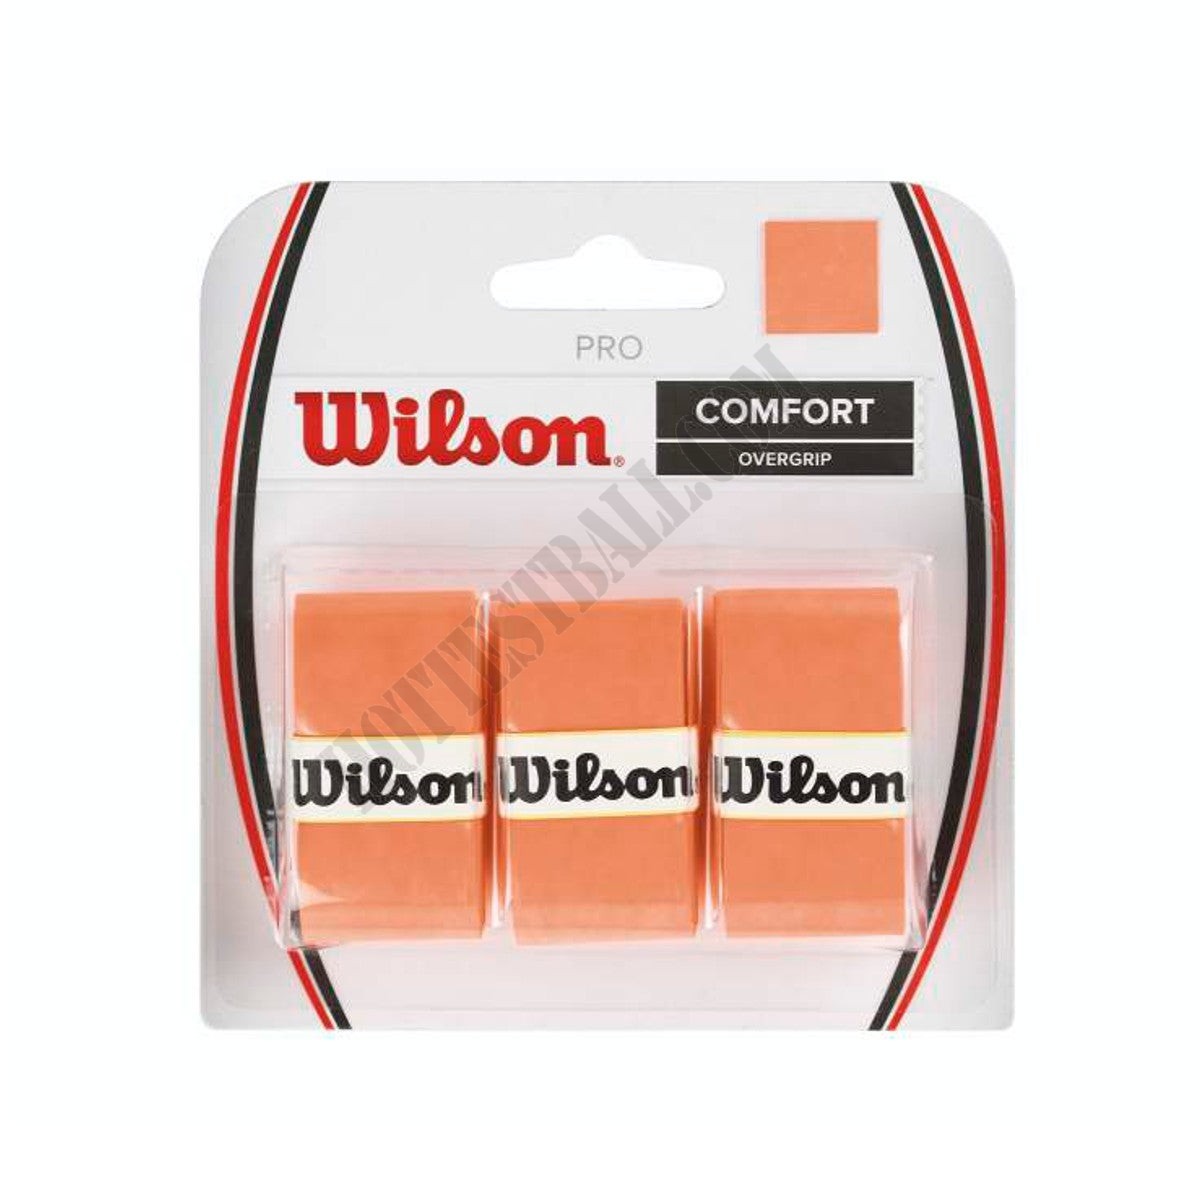 Pro Overgrip, 3 Pack - Wilson Discount Store - Pro Overgrip, 3 Pack - Wilson Discount Store